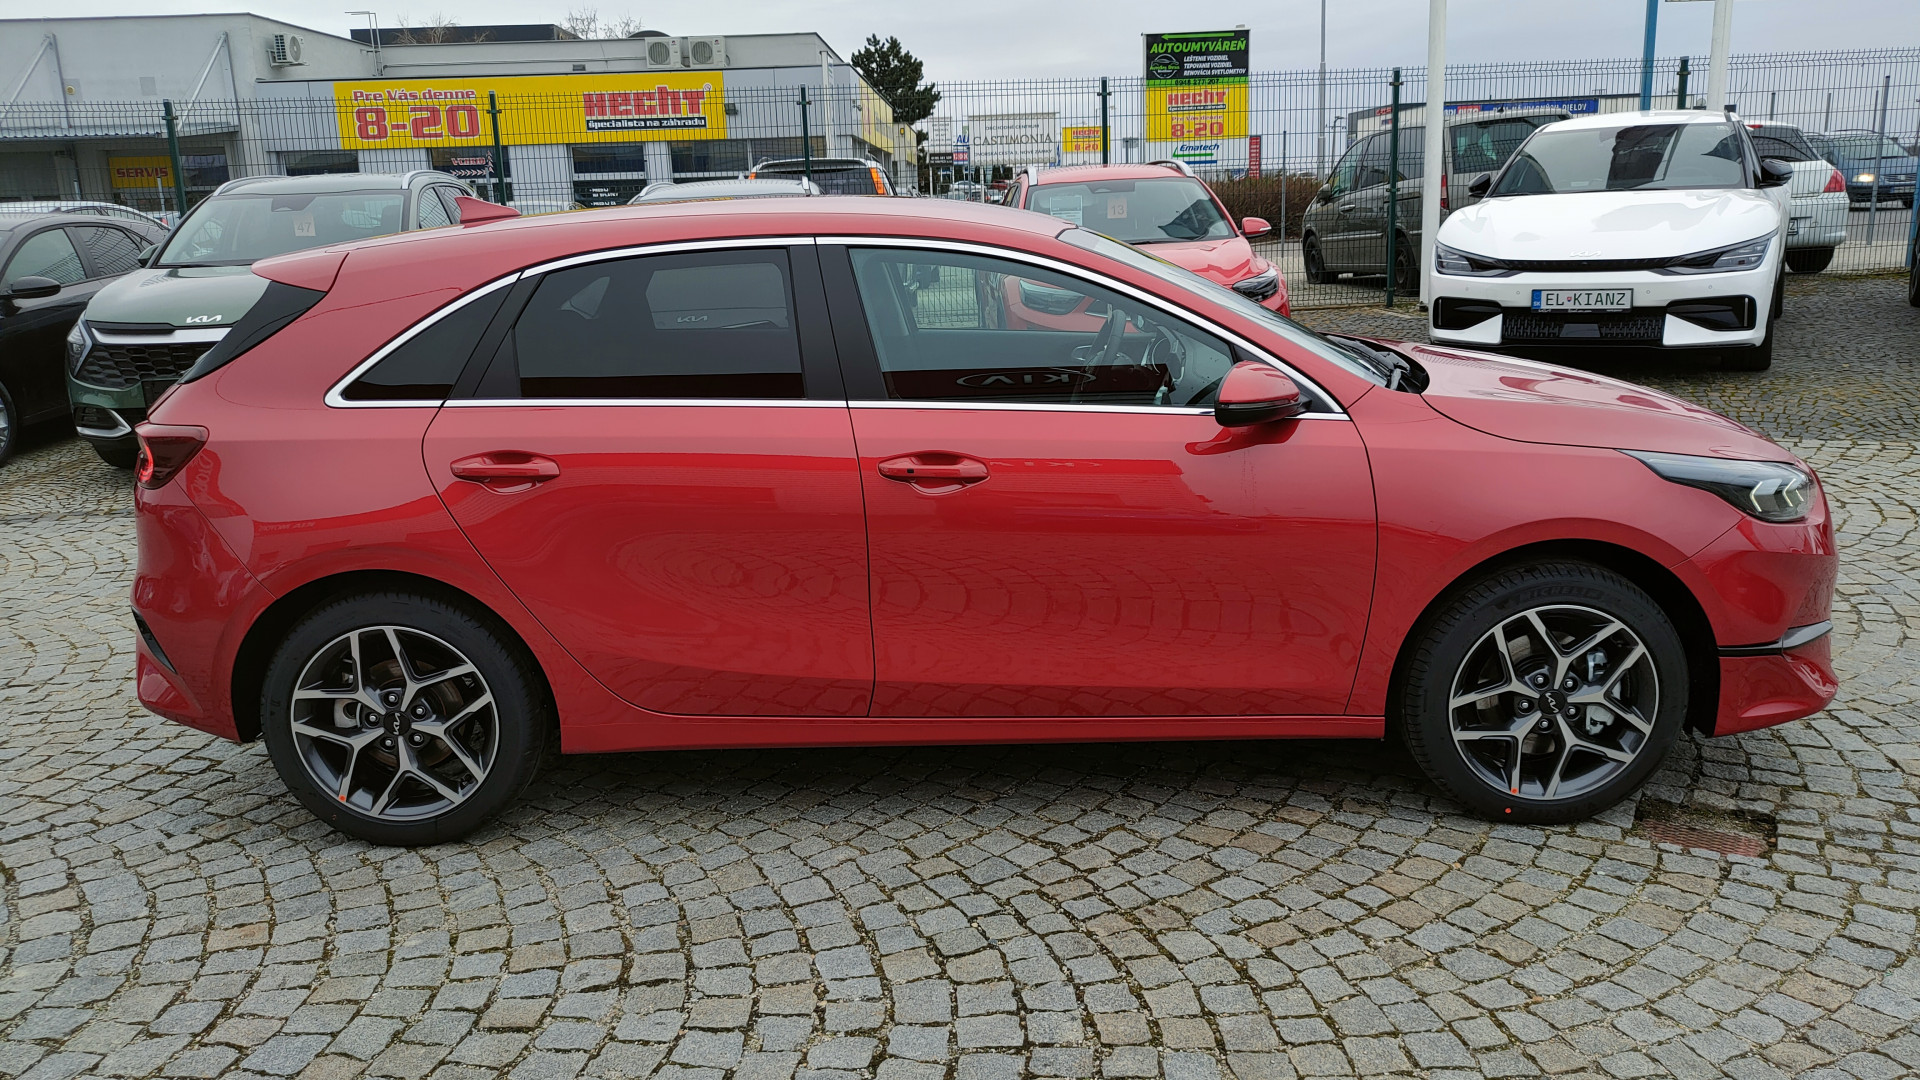 Kia CEED 1,5 T-GDi M6 Gold + LED + Gold pack